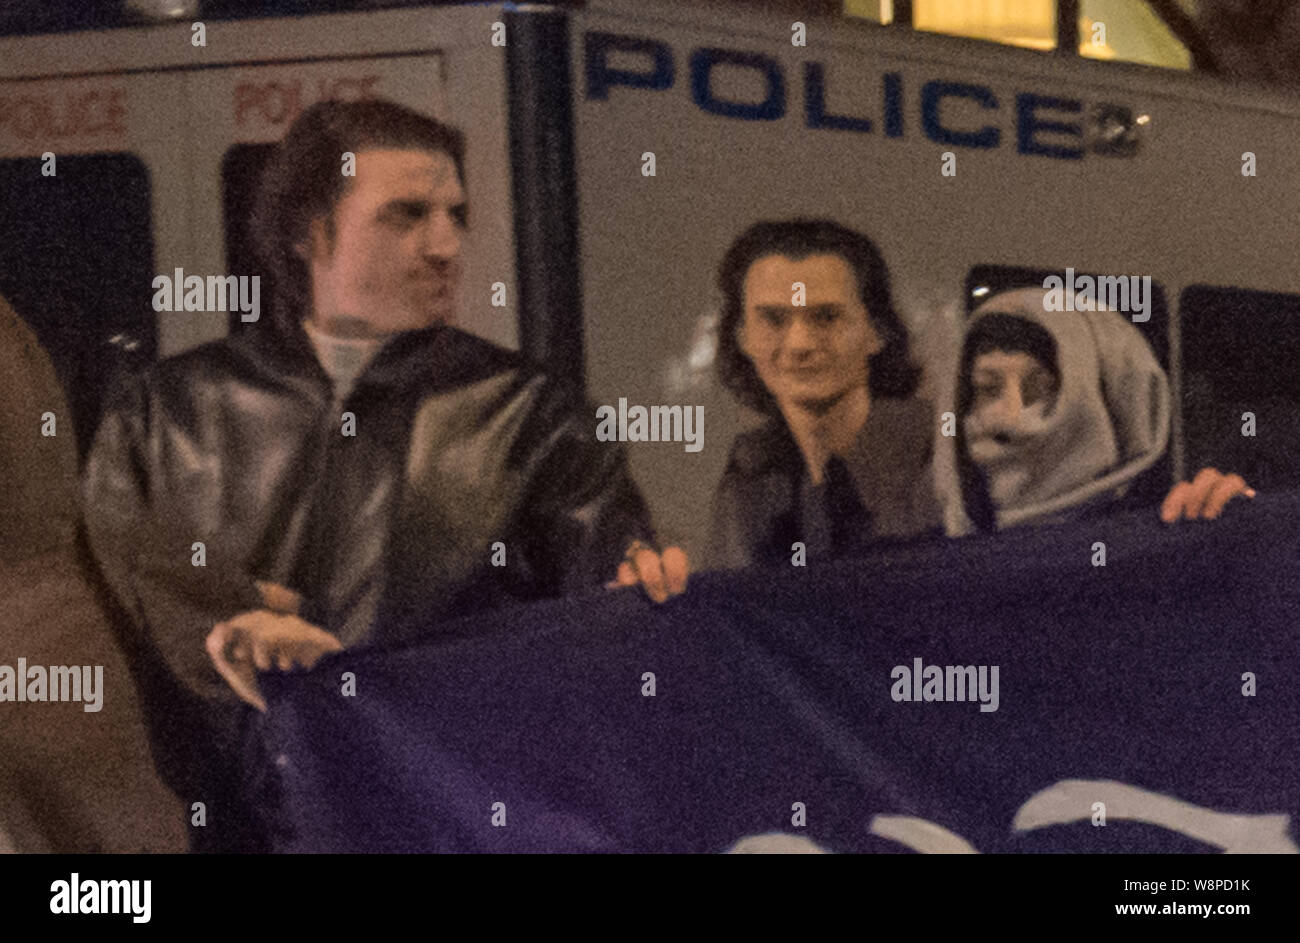 London, UK. 24th October, 2015. Up to 150 protesters including Charlie Gilmour, took part in a demonstration at St Pancras railway station in response Stock Photo